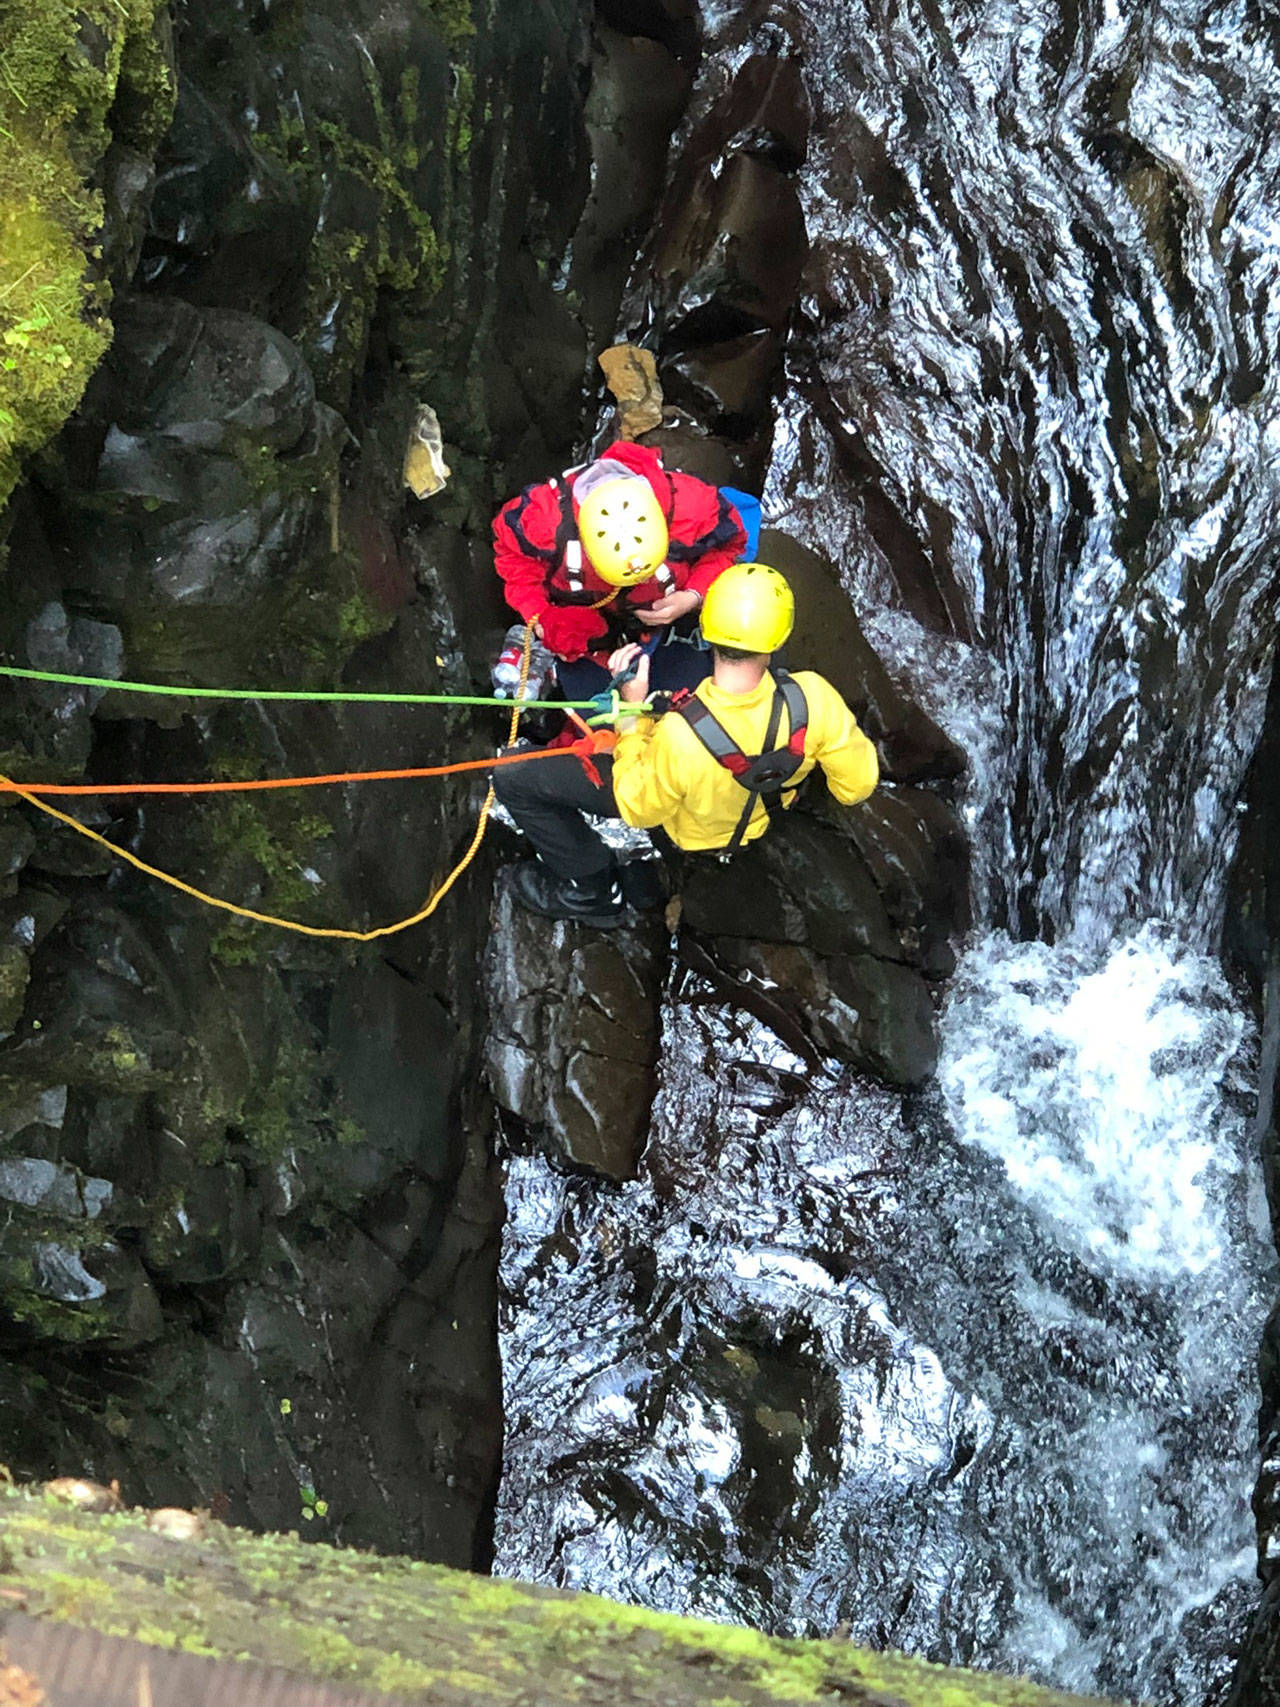 A first responder works to rescue a teenager who was trapped on a rock in the Sol Duc River on Monday. (Assistant Chief Dan Huff/Clallam County Fire District No. 2)